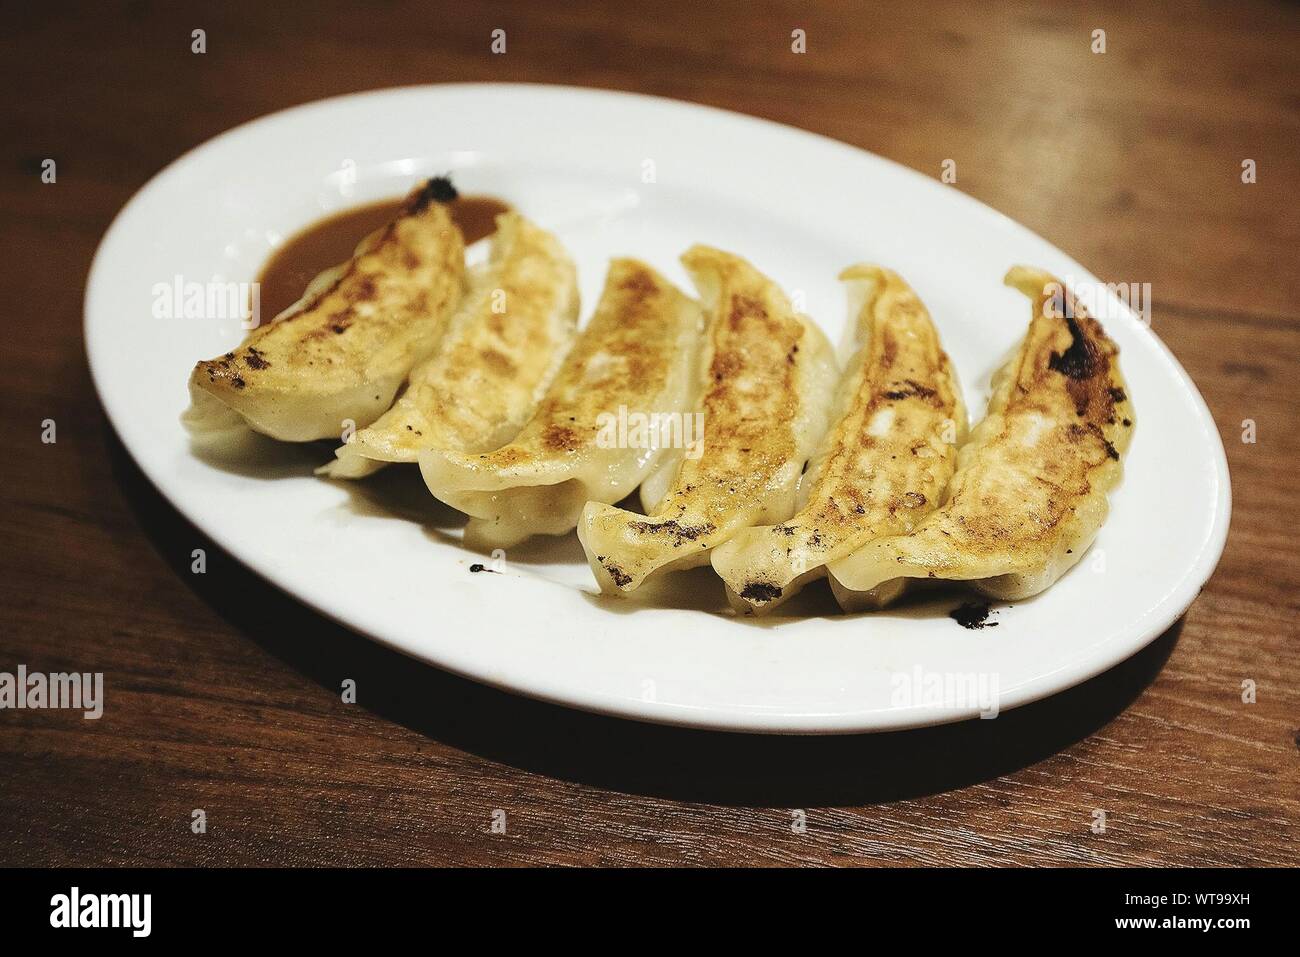 Close-up Of Fresh Crunchy Jiaozis In Plate On Table Stock Photo